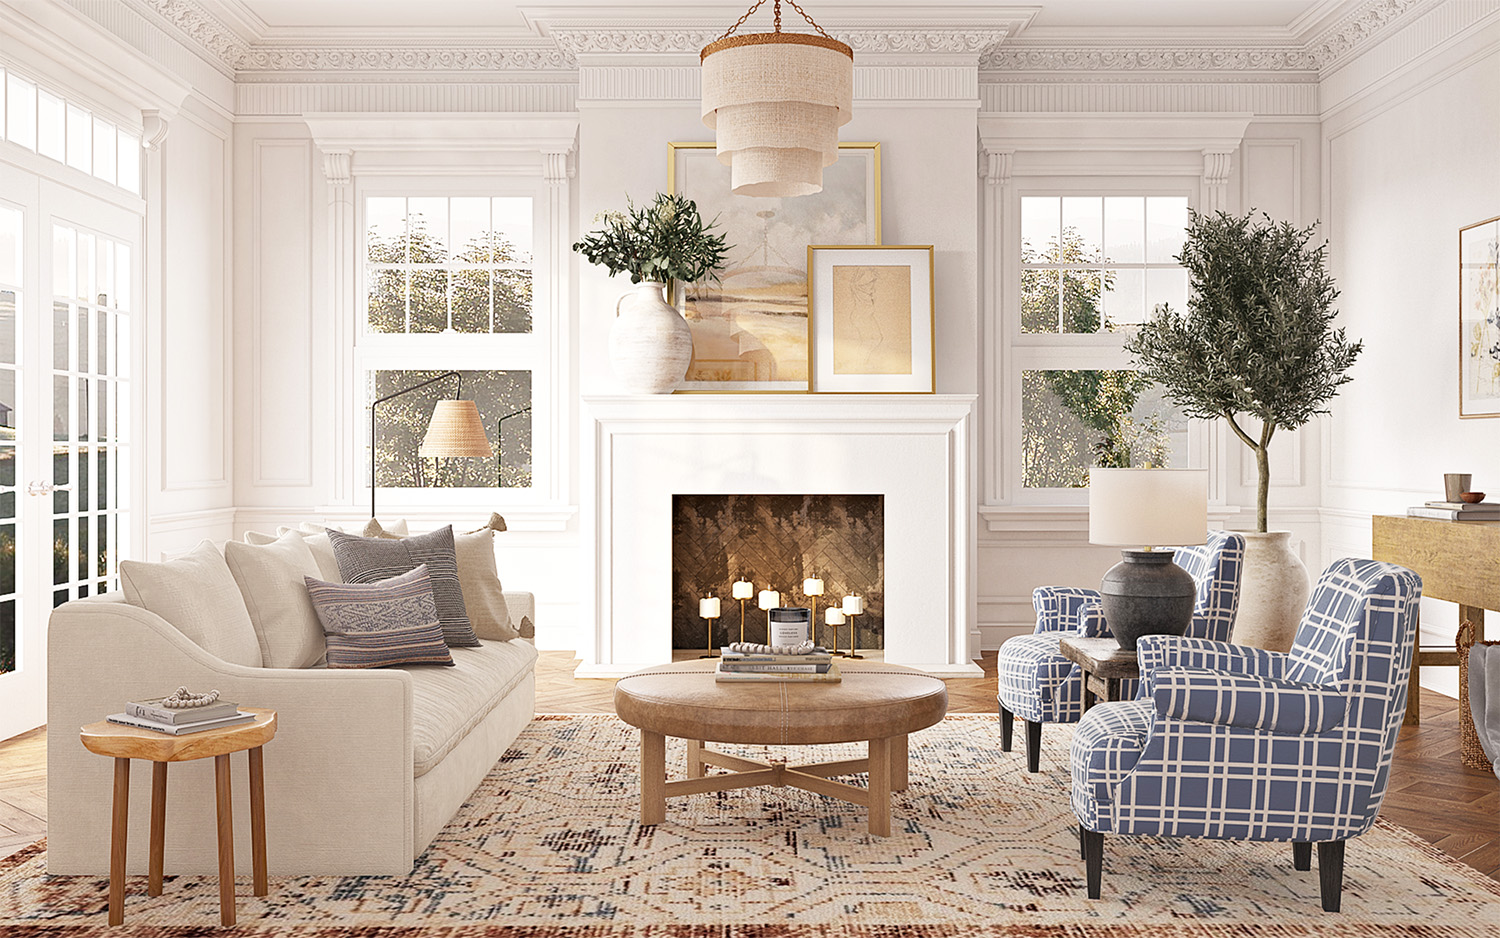 The 8 Living Room Layout Ideas Interior Designers Have on Lock